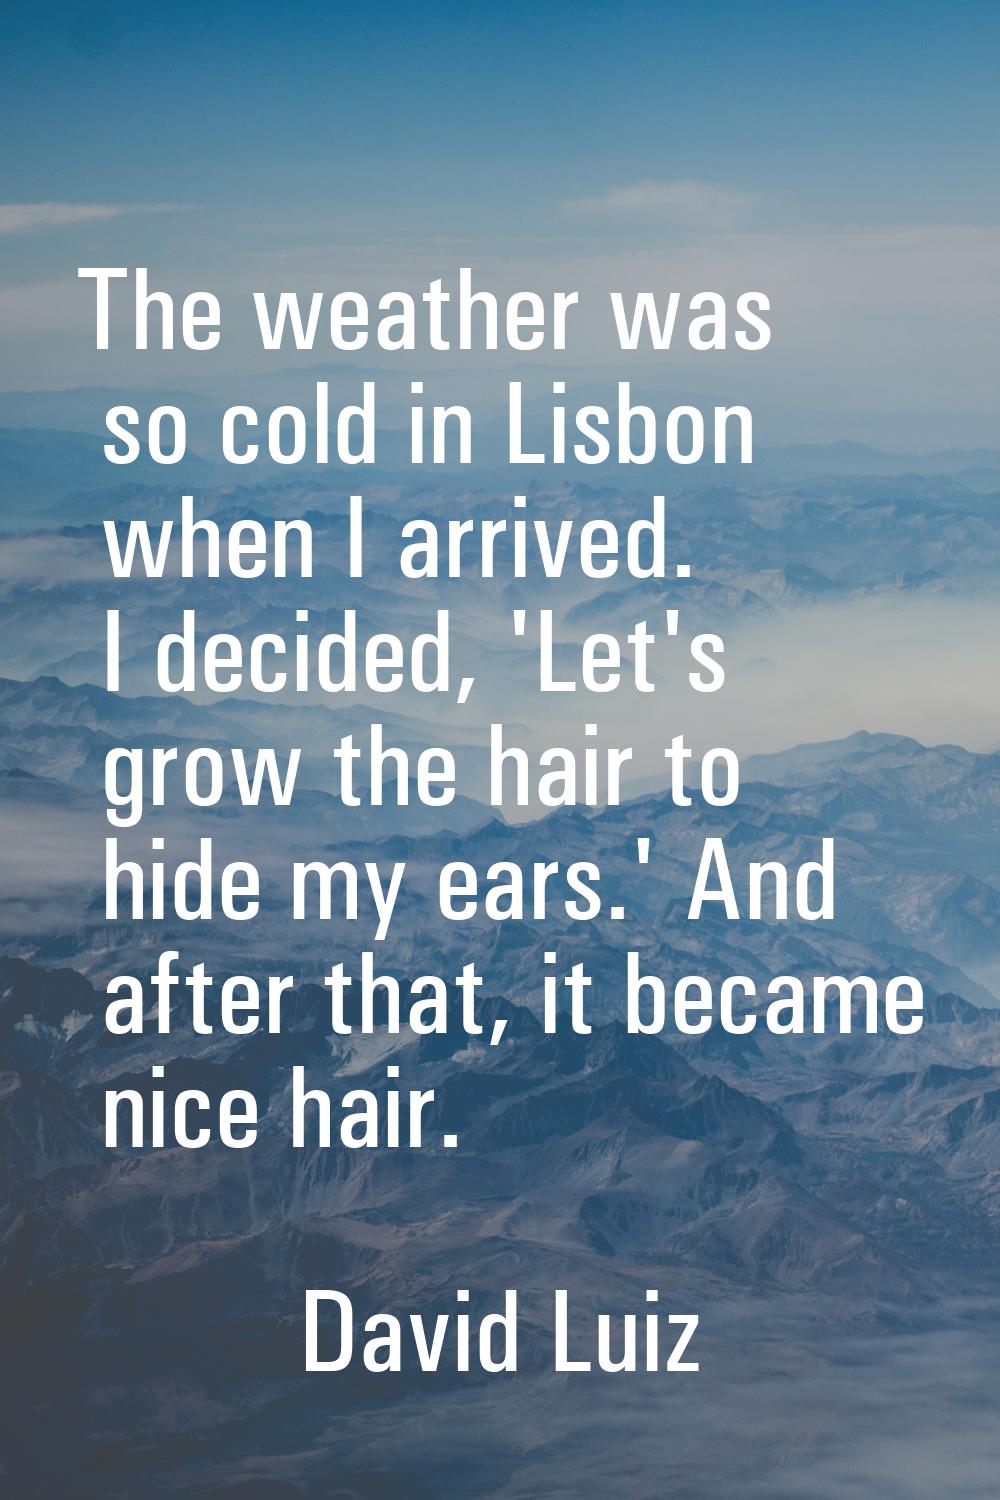 The weather was so cold in Lisbon when I arrived. I decided, 'Let's grow the hair to hide my ears.'